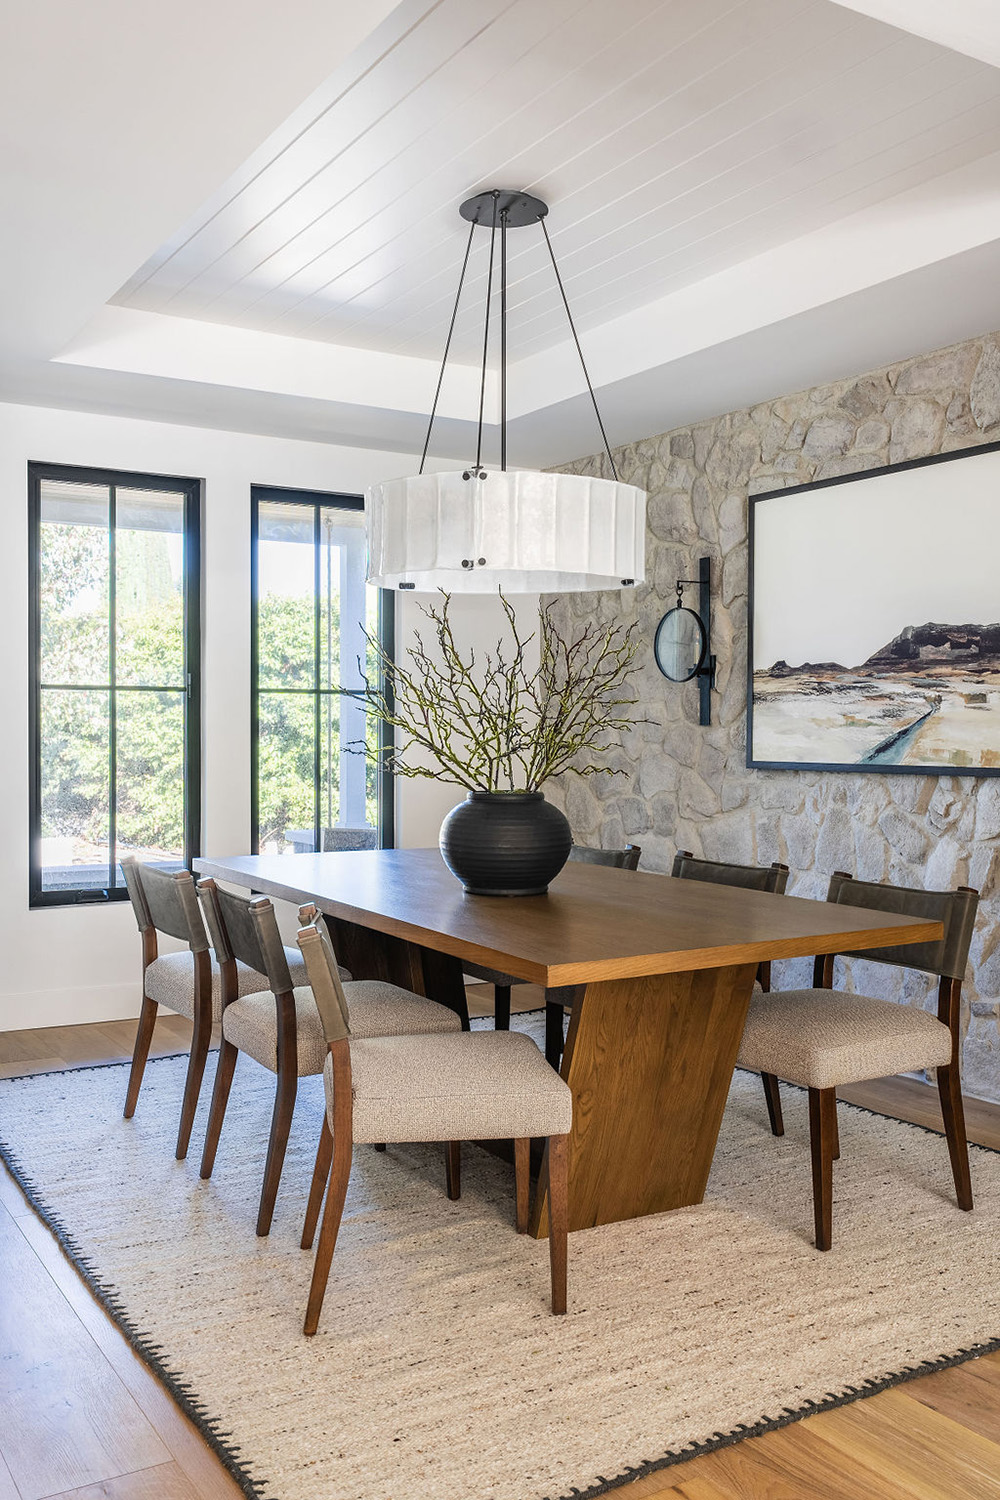 dining area with stone accent wall and large circular light fixture over a wood table